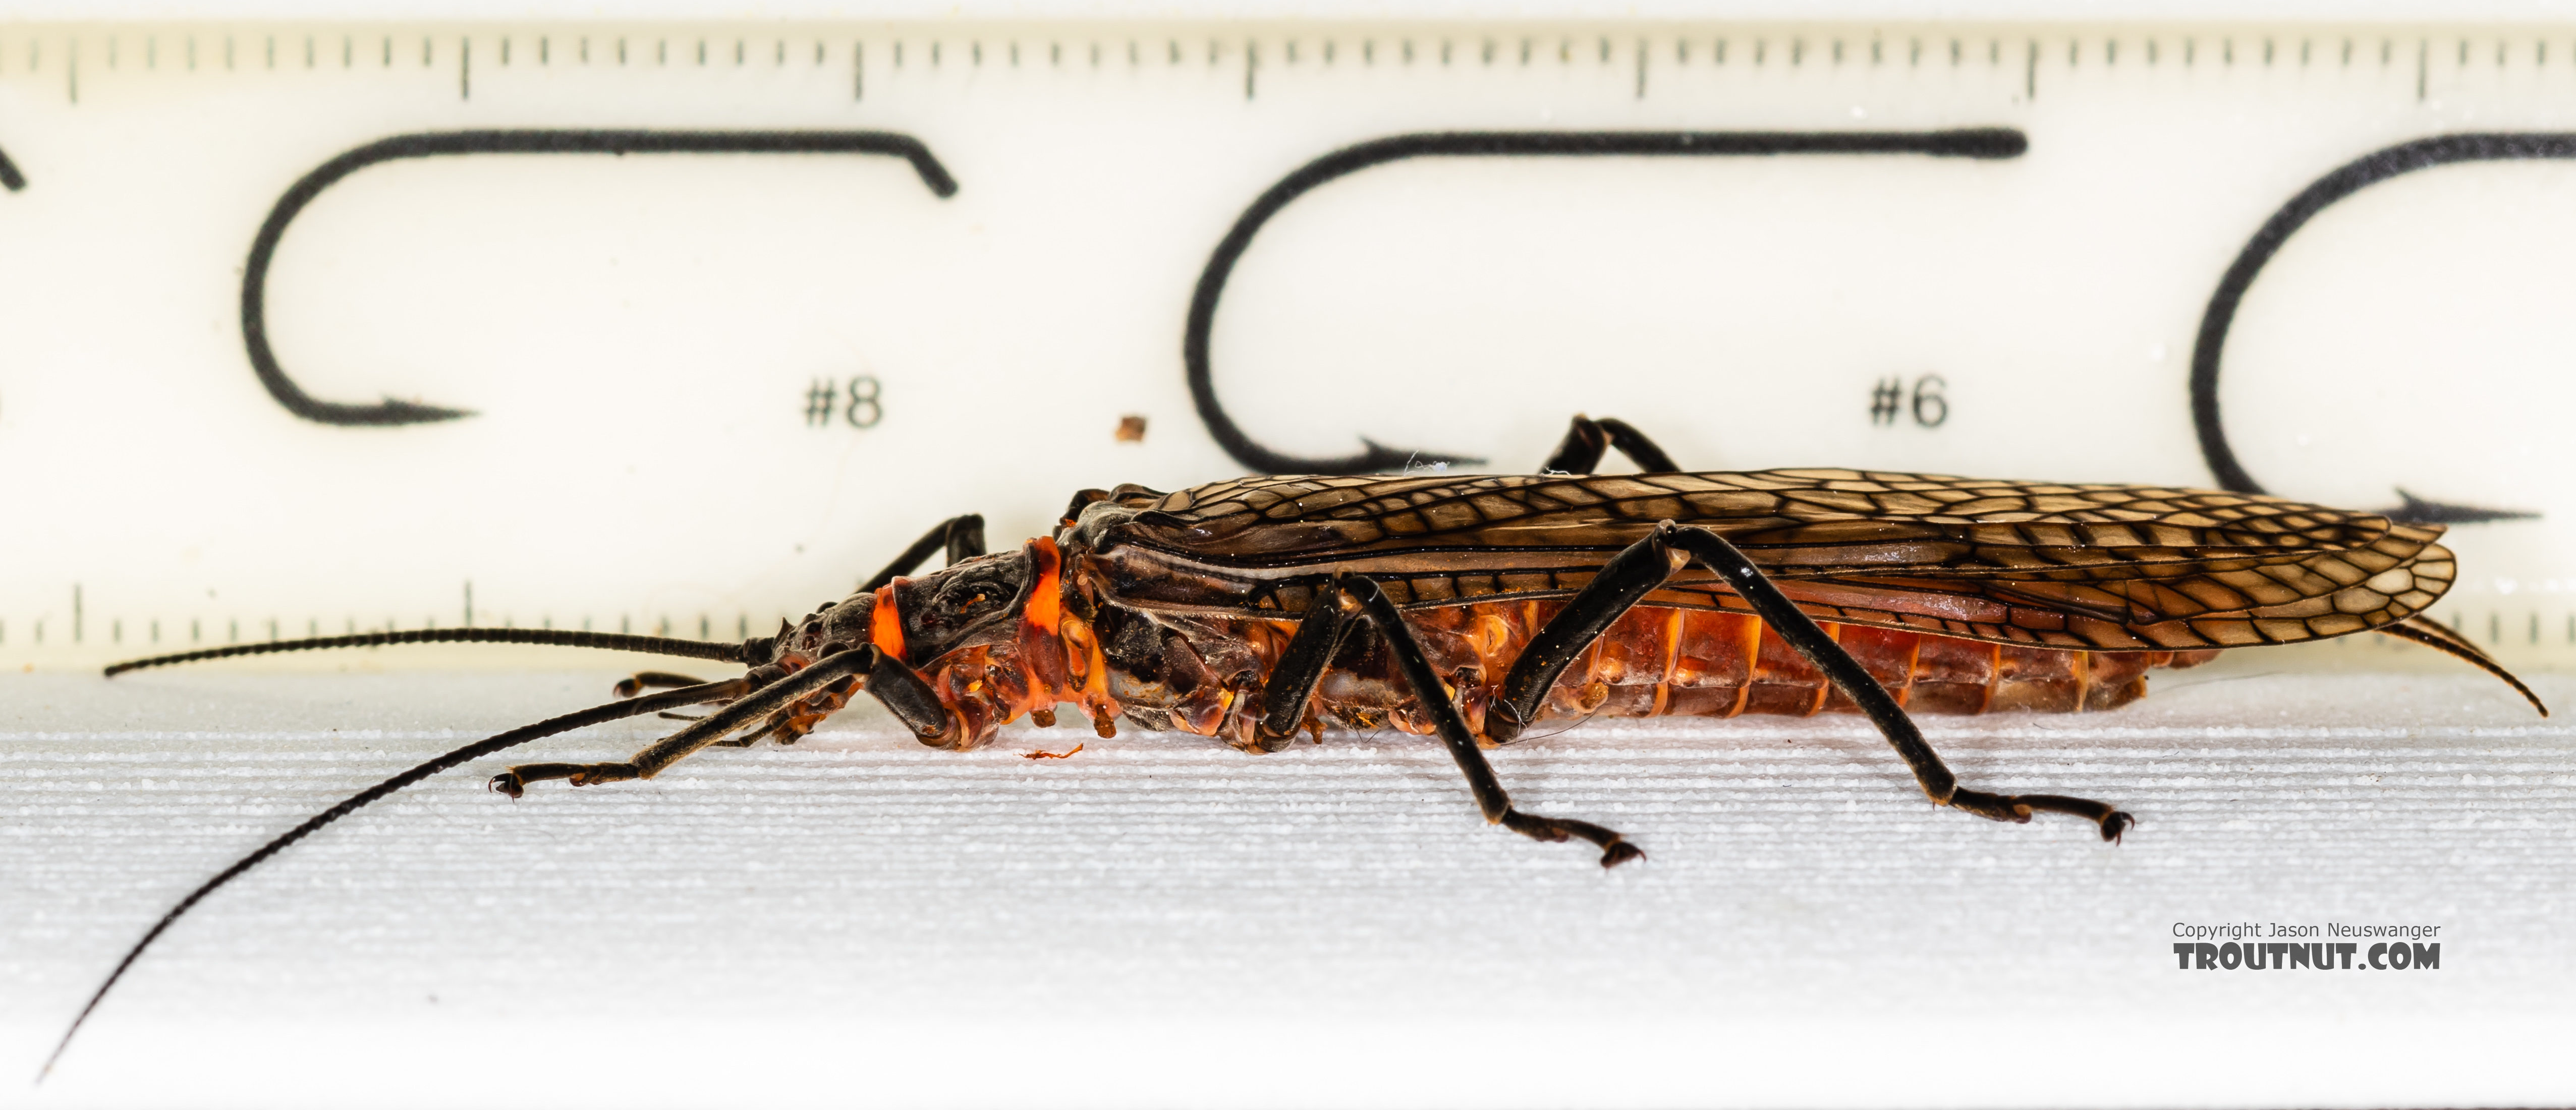 Male Pteronarcys californica (Giant Salmonfly) Stonefly Adult from the Gallatin River in Montana